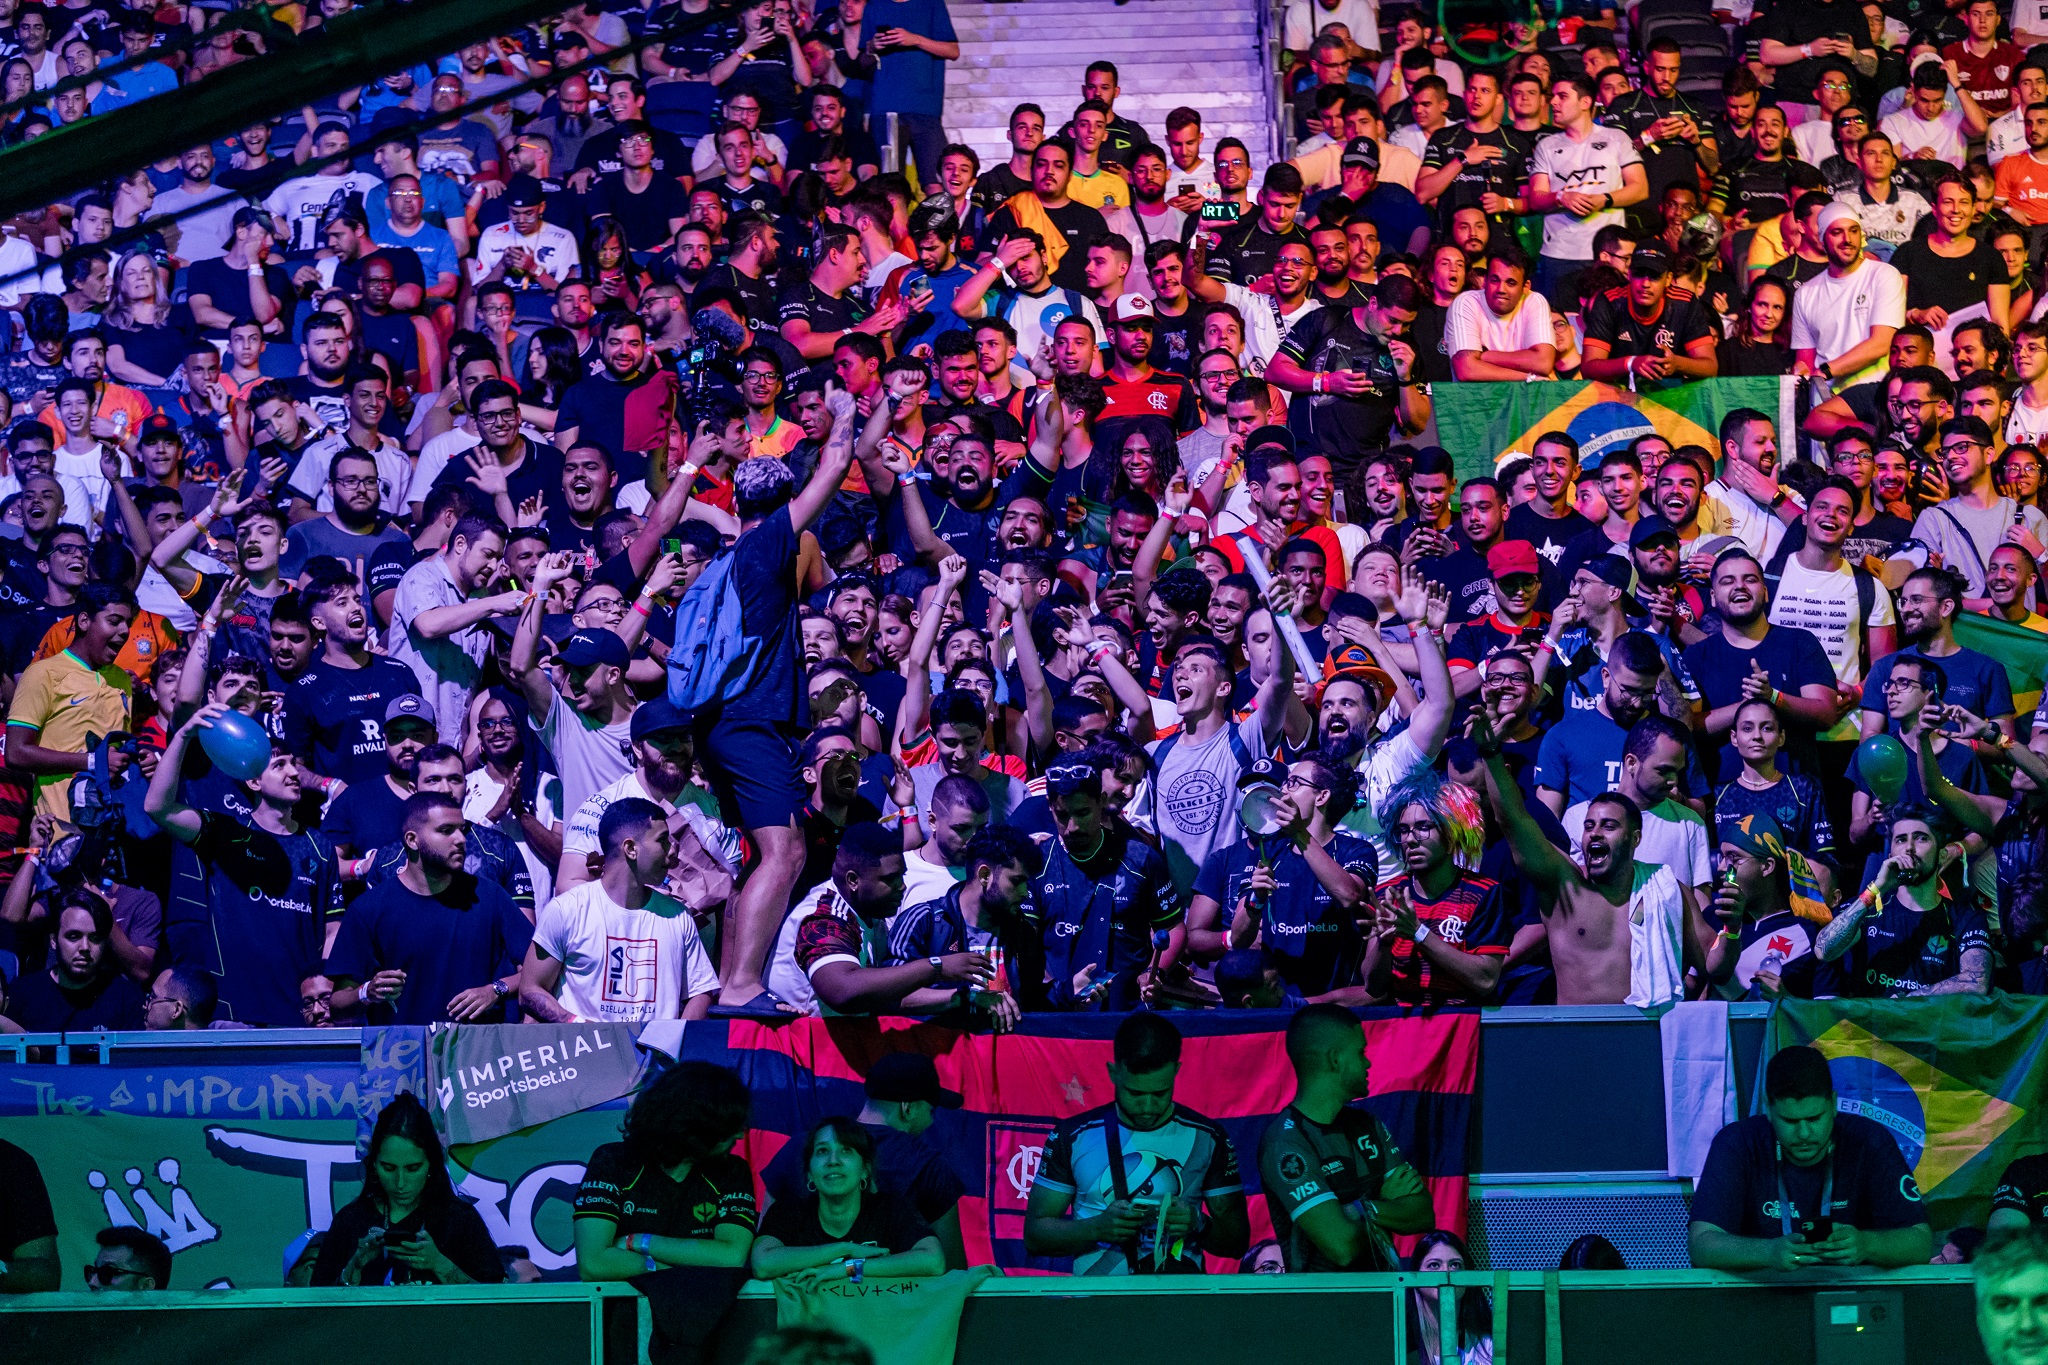 At Counter-Strike Rio Major, Brazil's fans take cheering to a new level -  The Washington Post